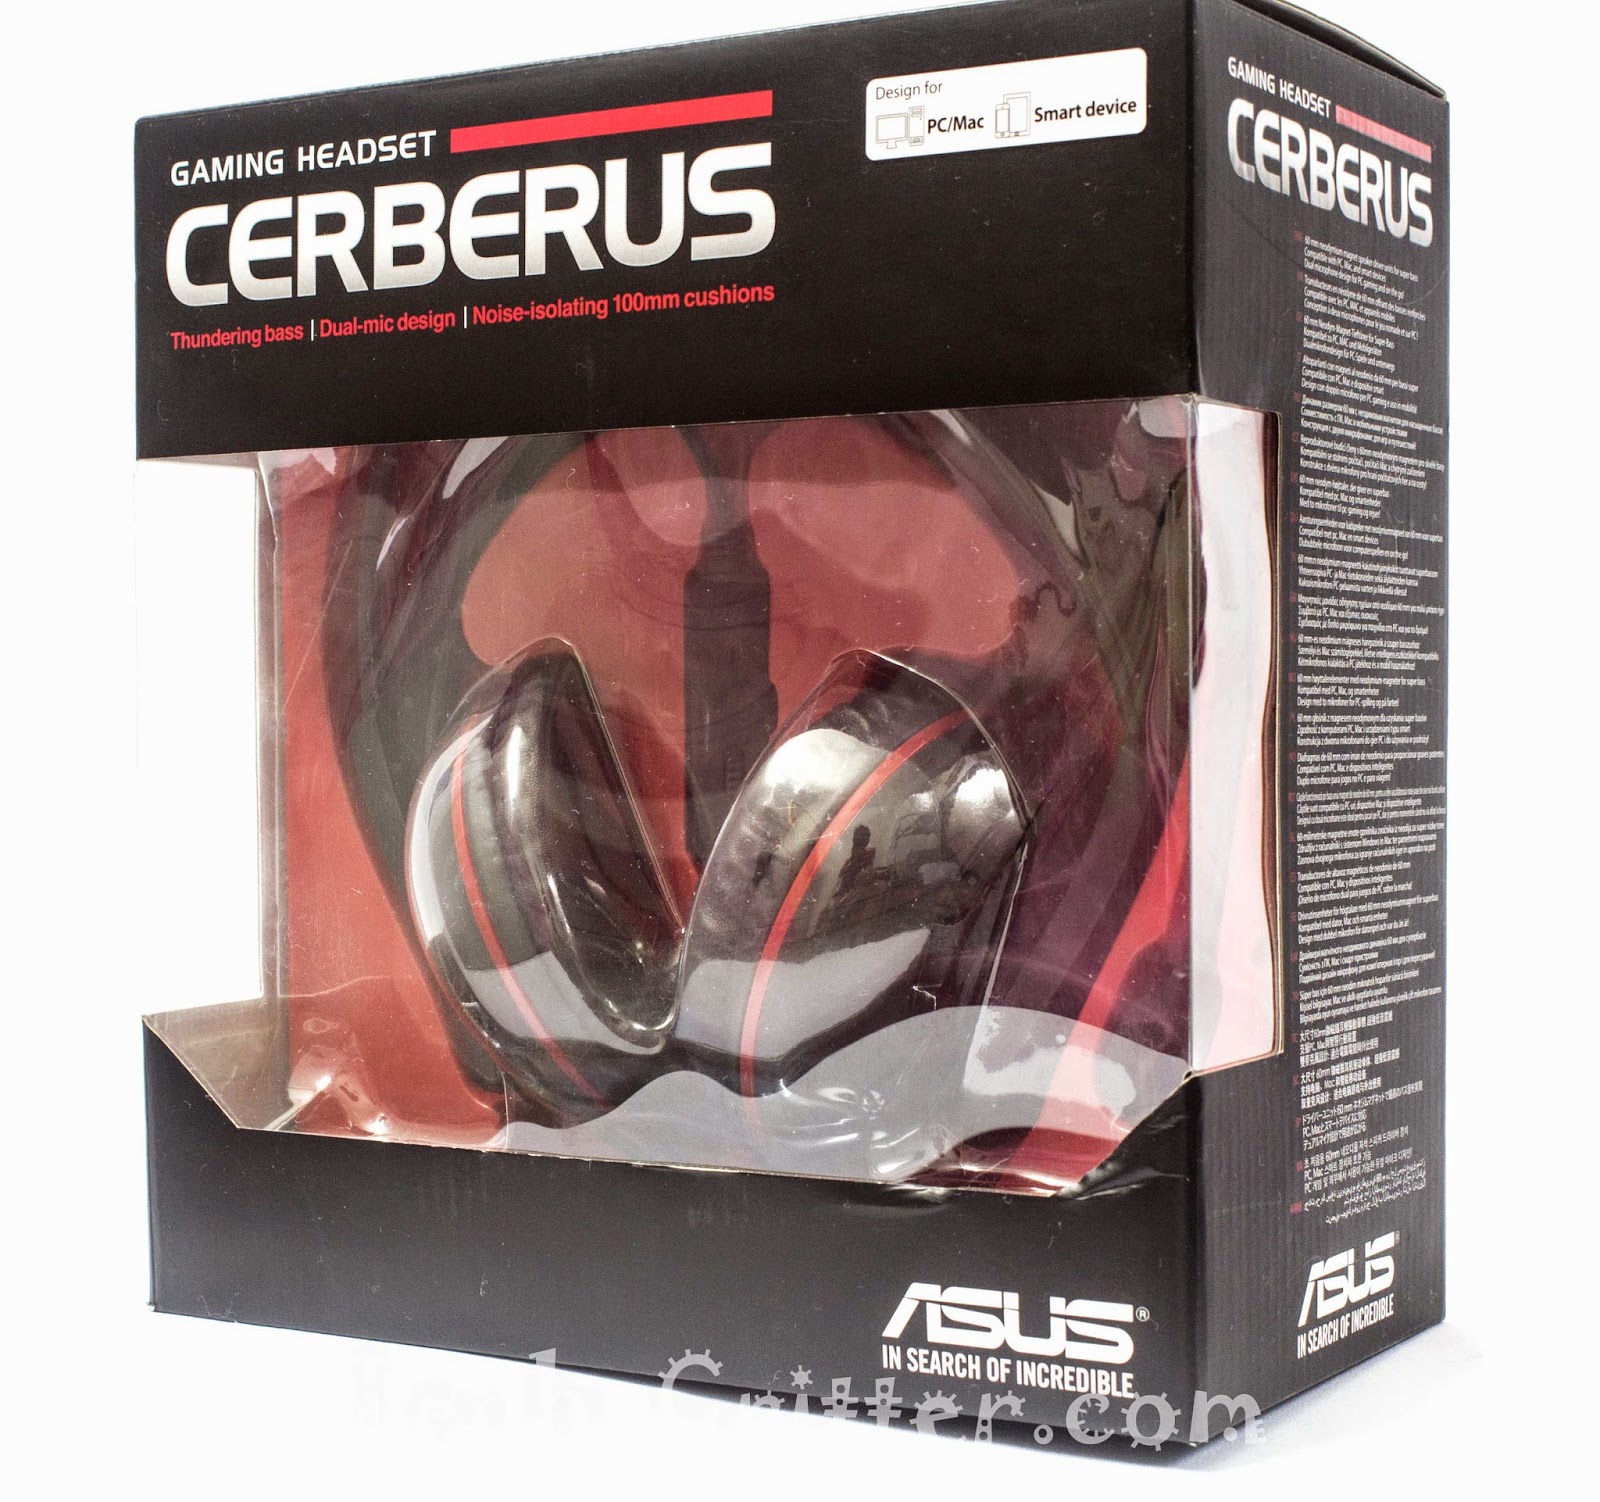 Unboxing & Review: ASUS Cerberus Gaming Headset 35